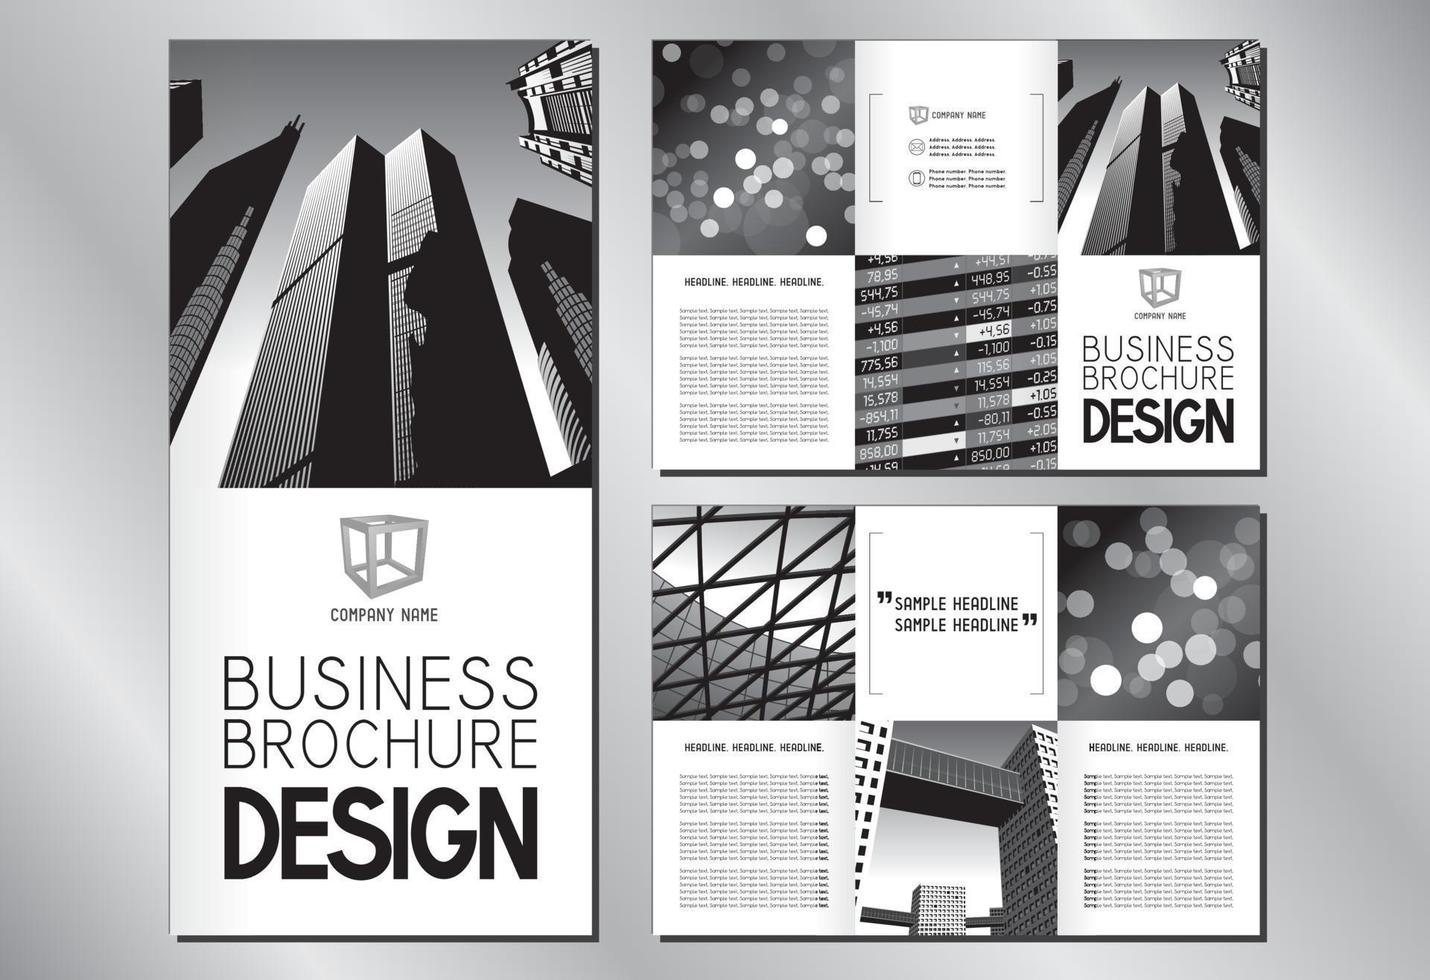 Business Trifold Brochure Template vector